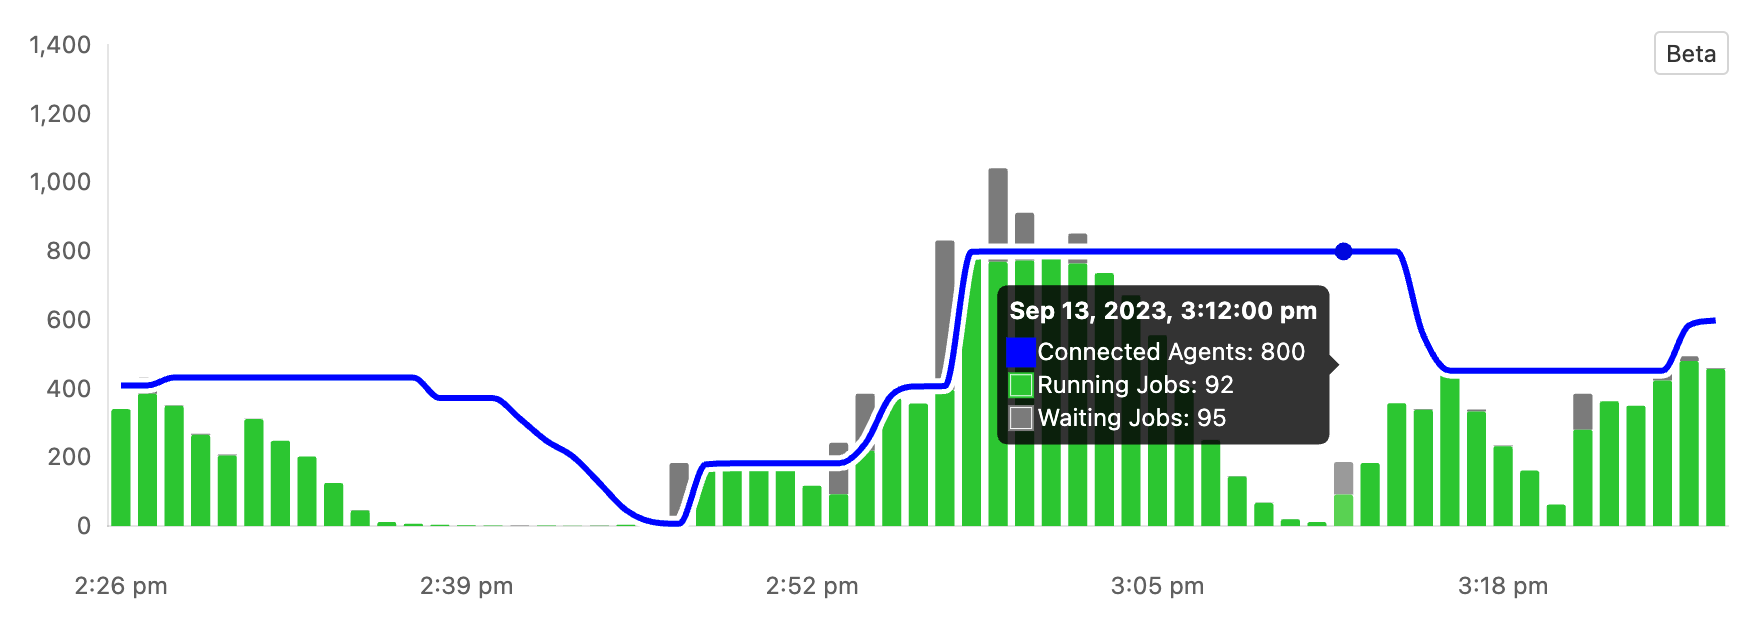 Screenshot of the queue chart showing connected agents, waiting jobs, and running jobs